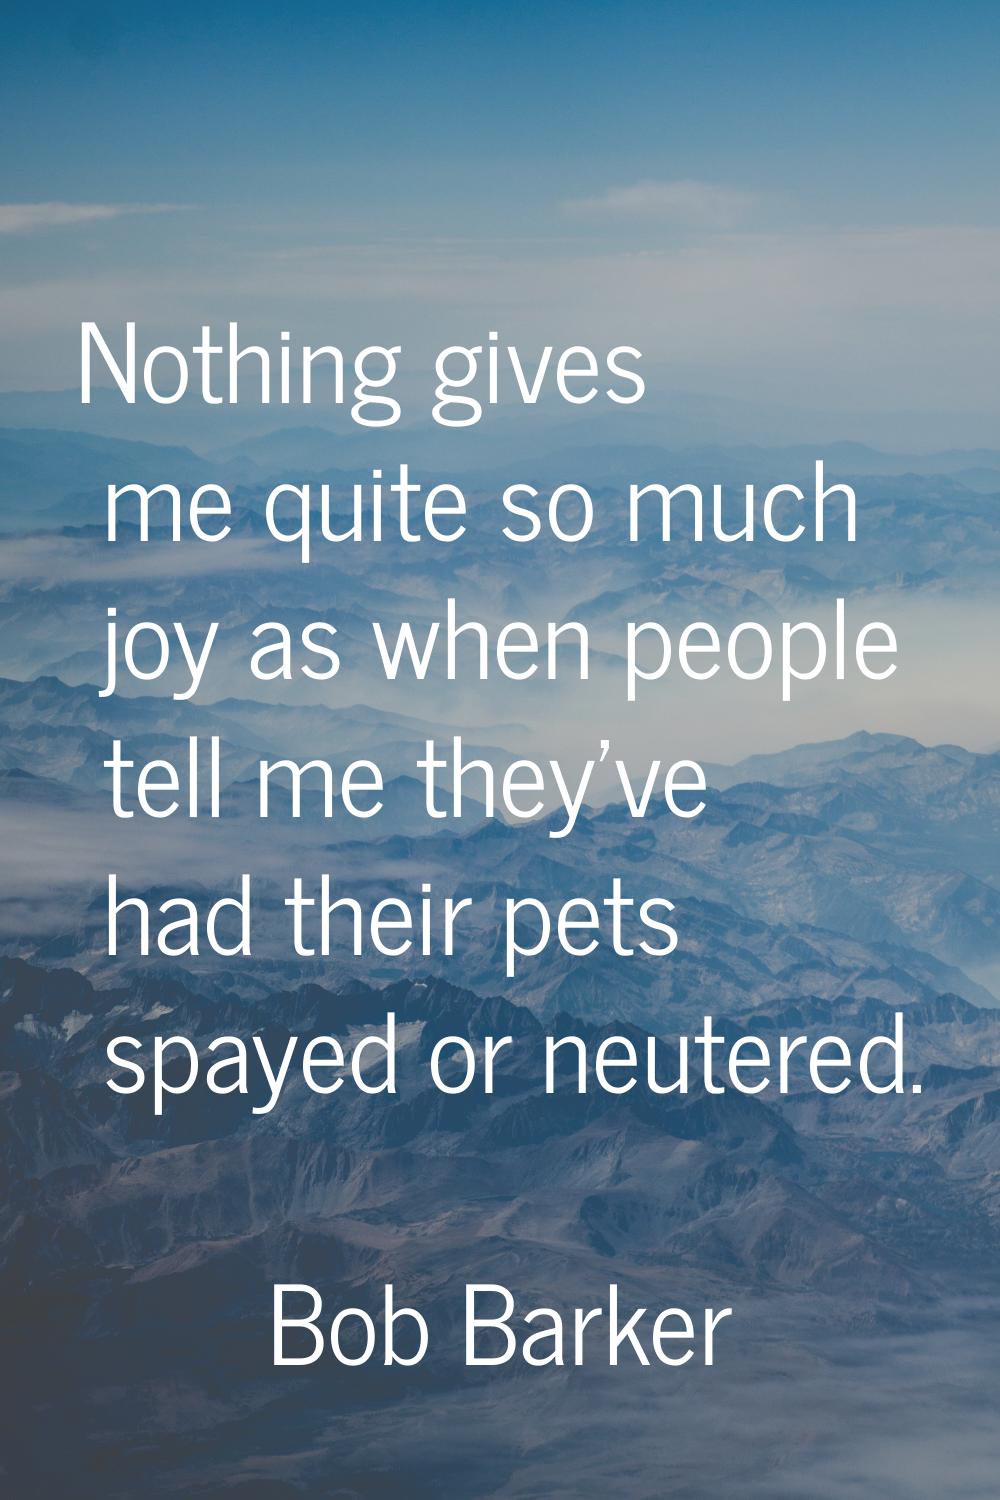 Nothing gives me quite so much joy as when people tell me they've had their pets spayed or neutered